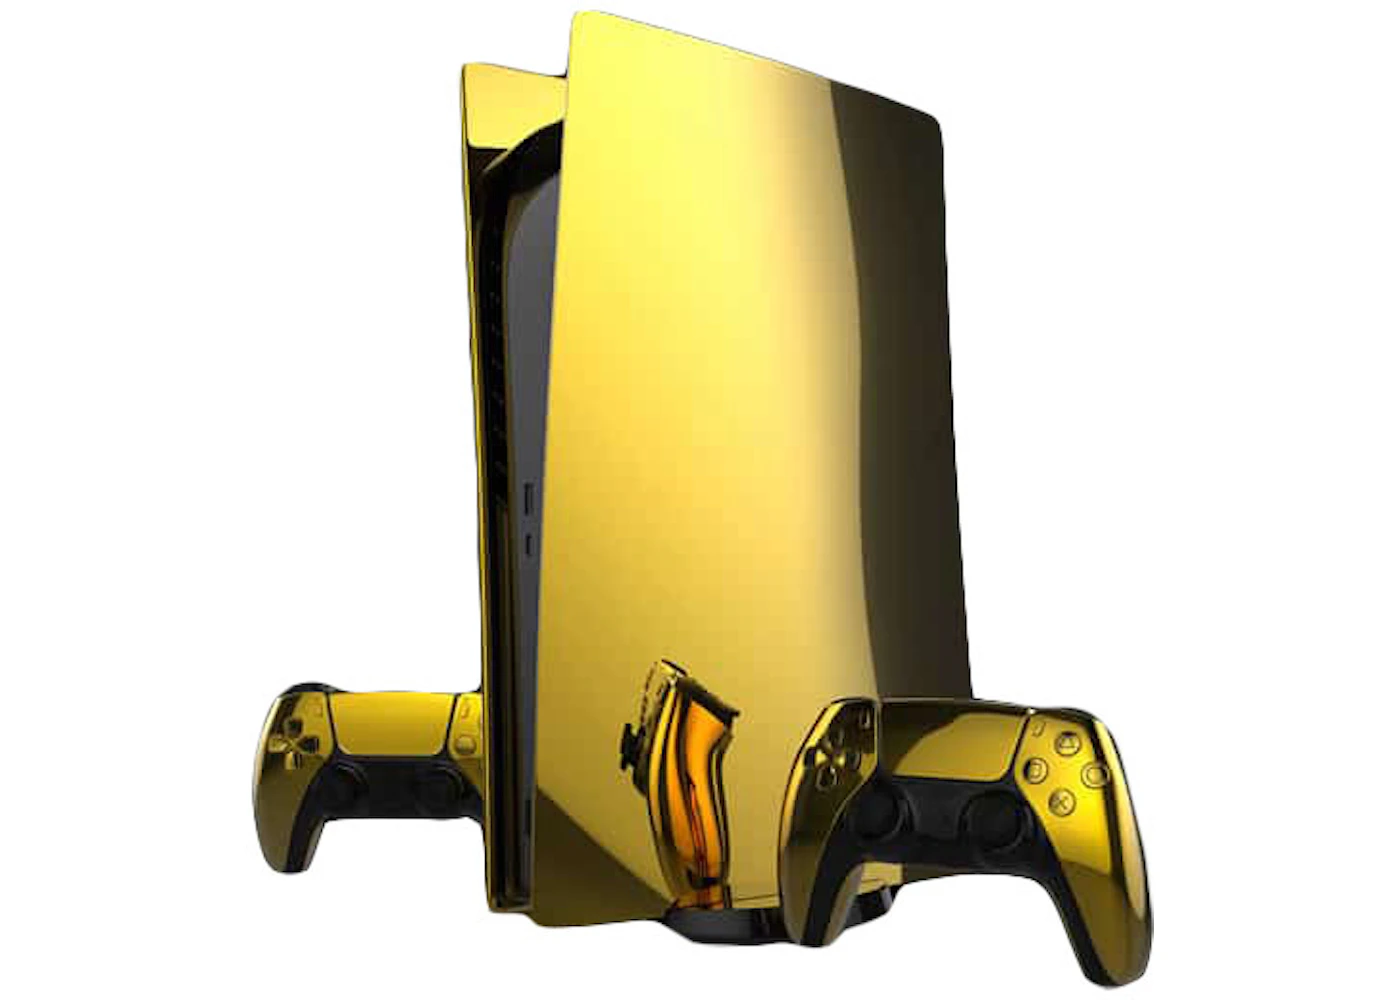 This PS5 is 24-karat gold plated, and will definitely break your